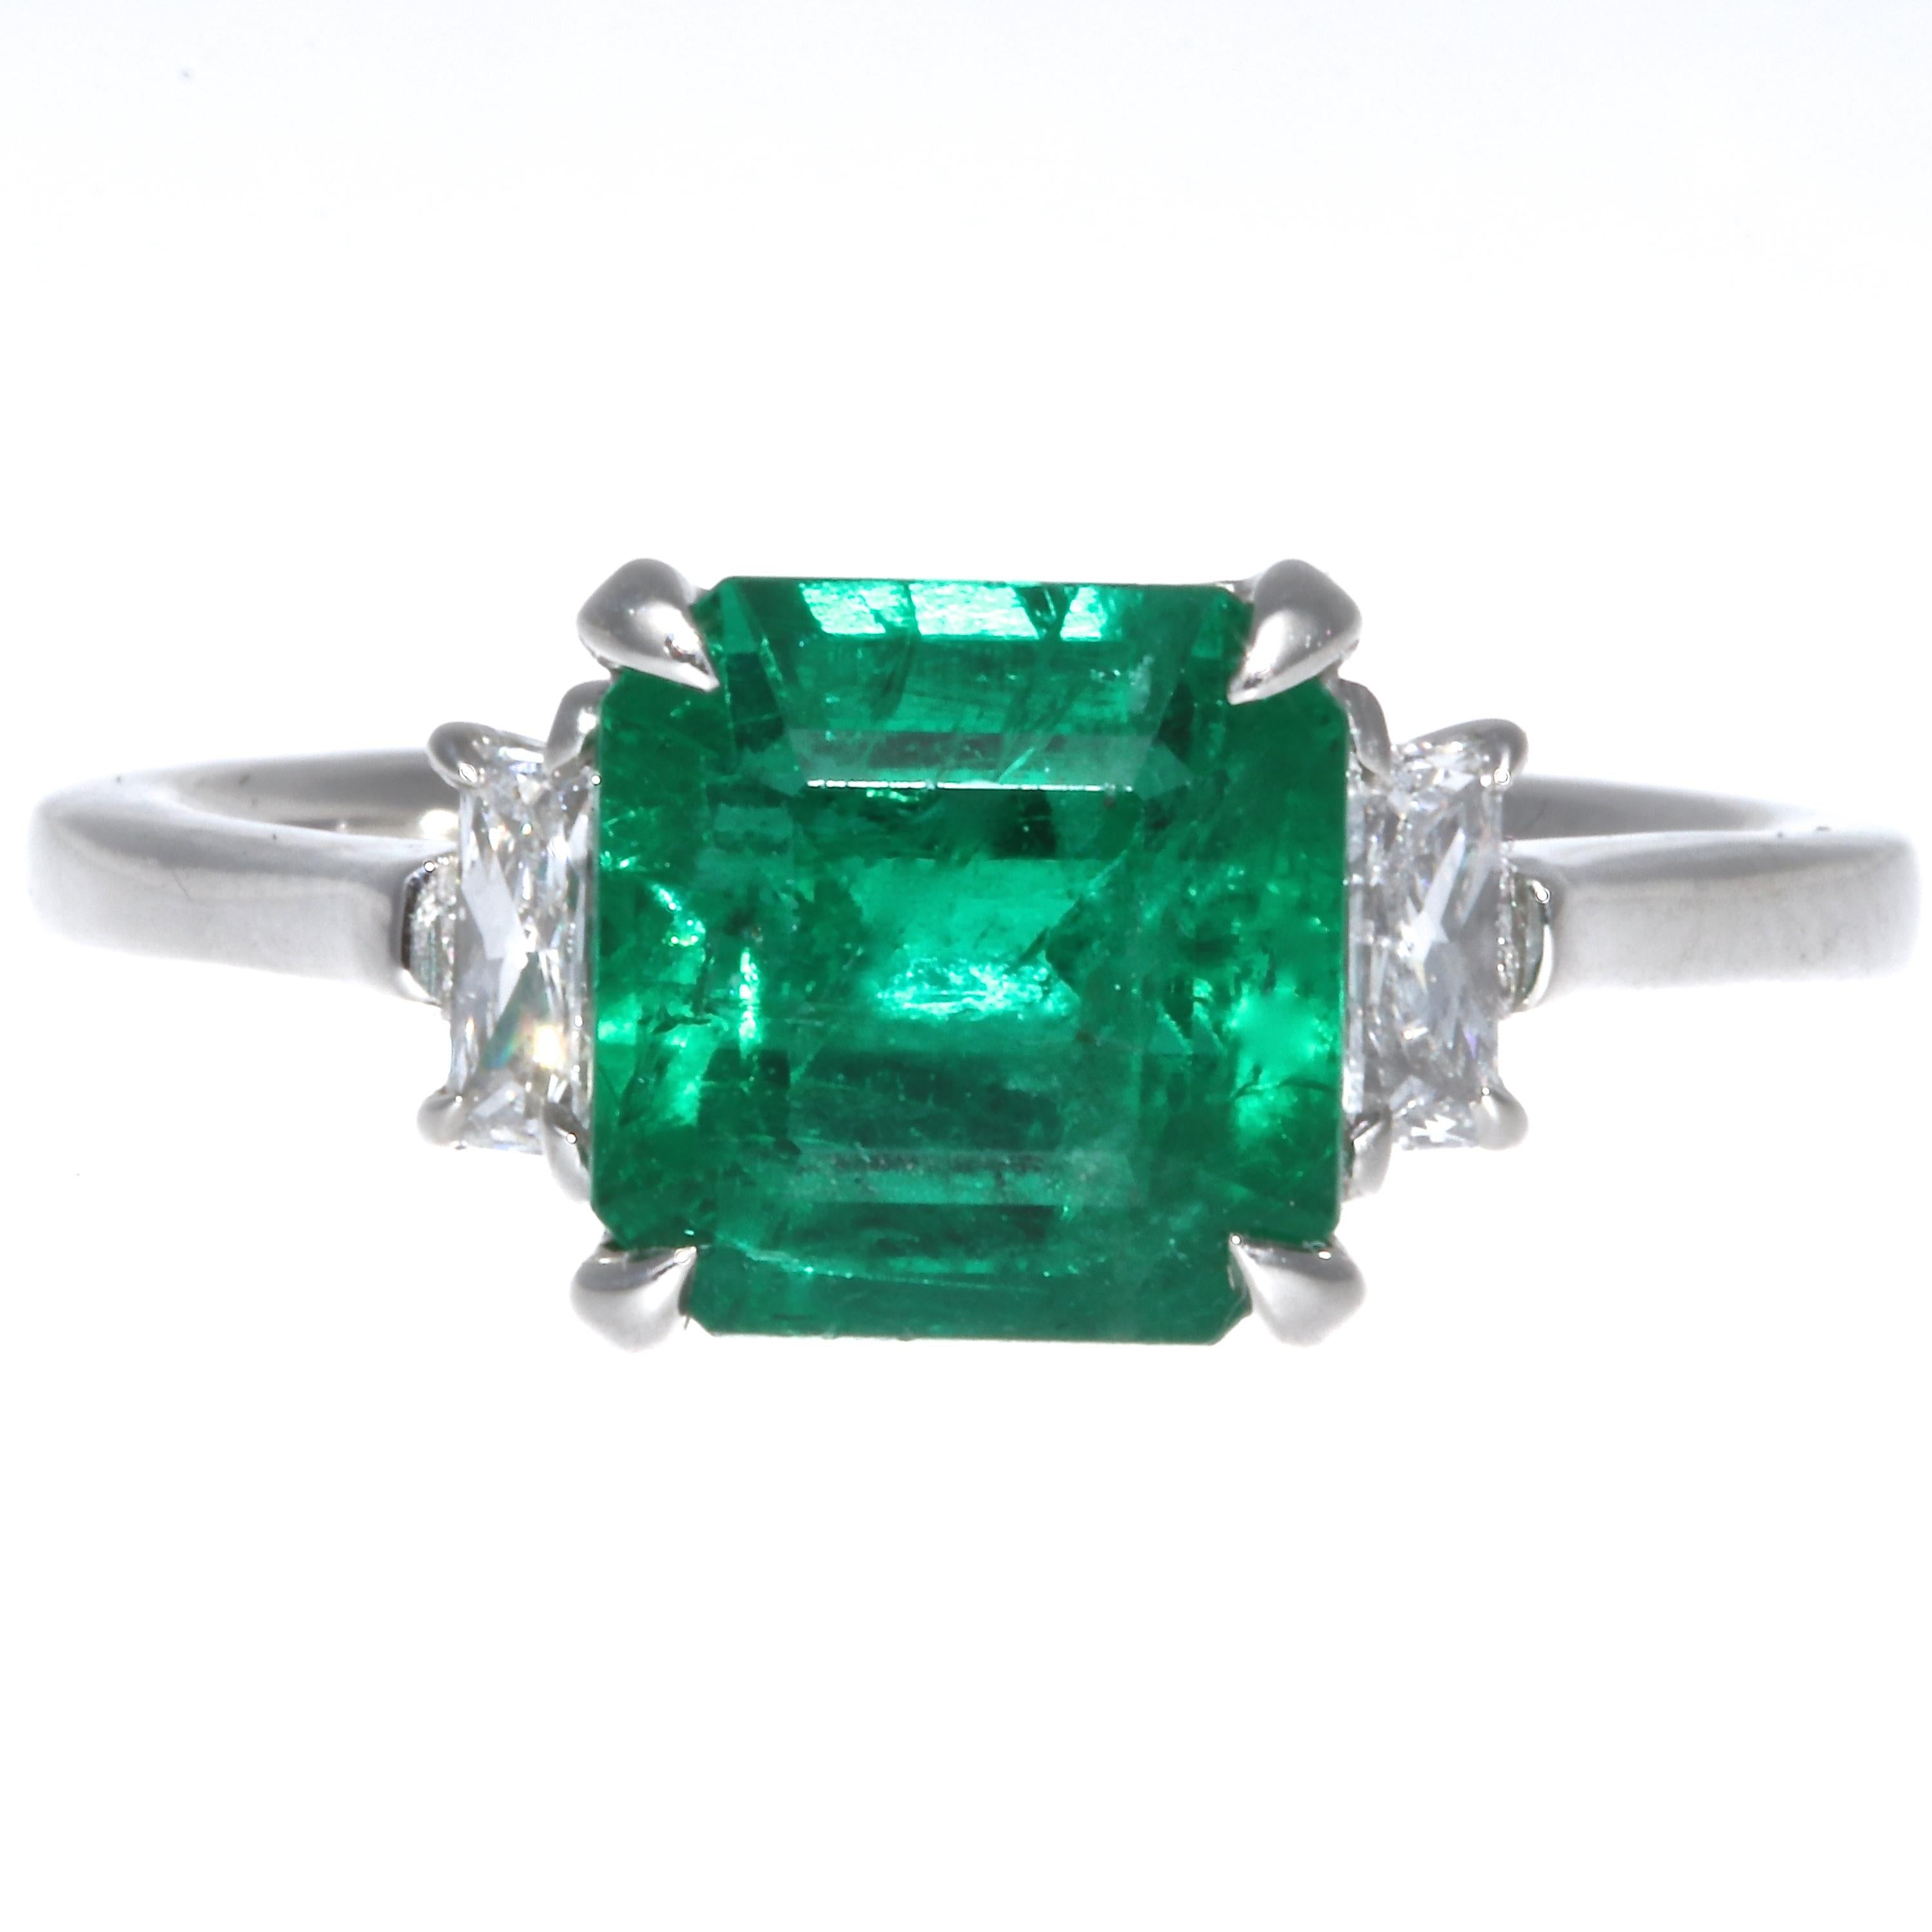 The richly colored  translucent Zambian emerald weighs 2.32 carats and is an excellent example of emeralds from that region. Set in a platinum ring, accented by 2 radiant cut diamonds  weighing approximately  0.20 carats,  H-I color VS clarity. Ring